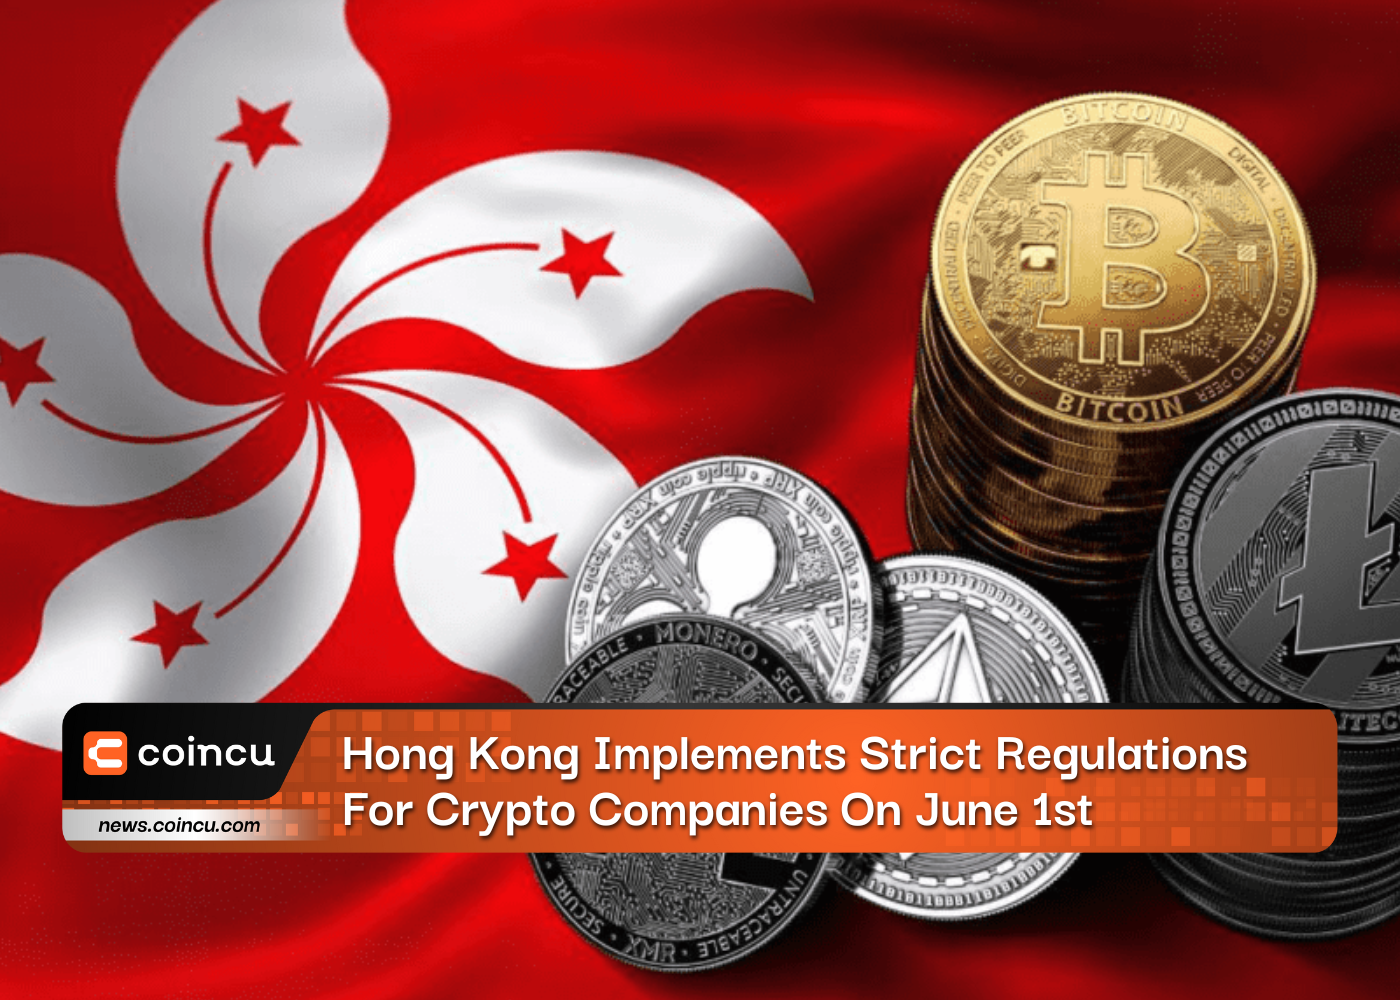 Hong Kong Implements Strict Regulations For Crypto Companies On June 1st